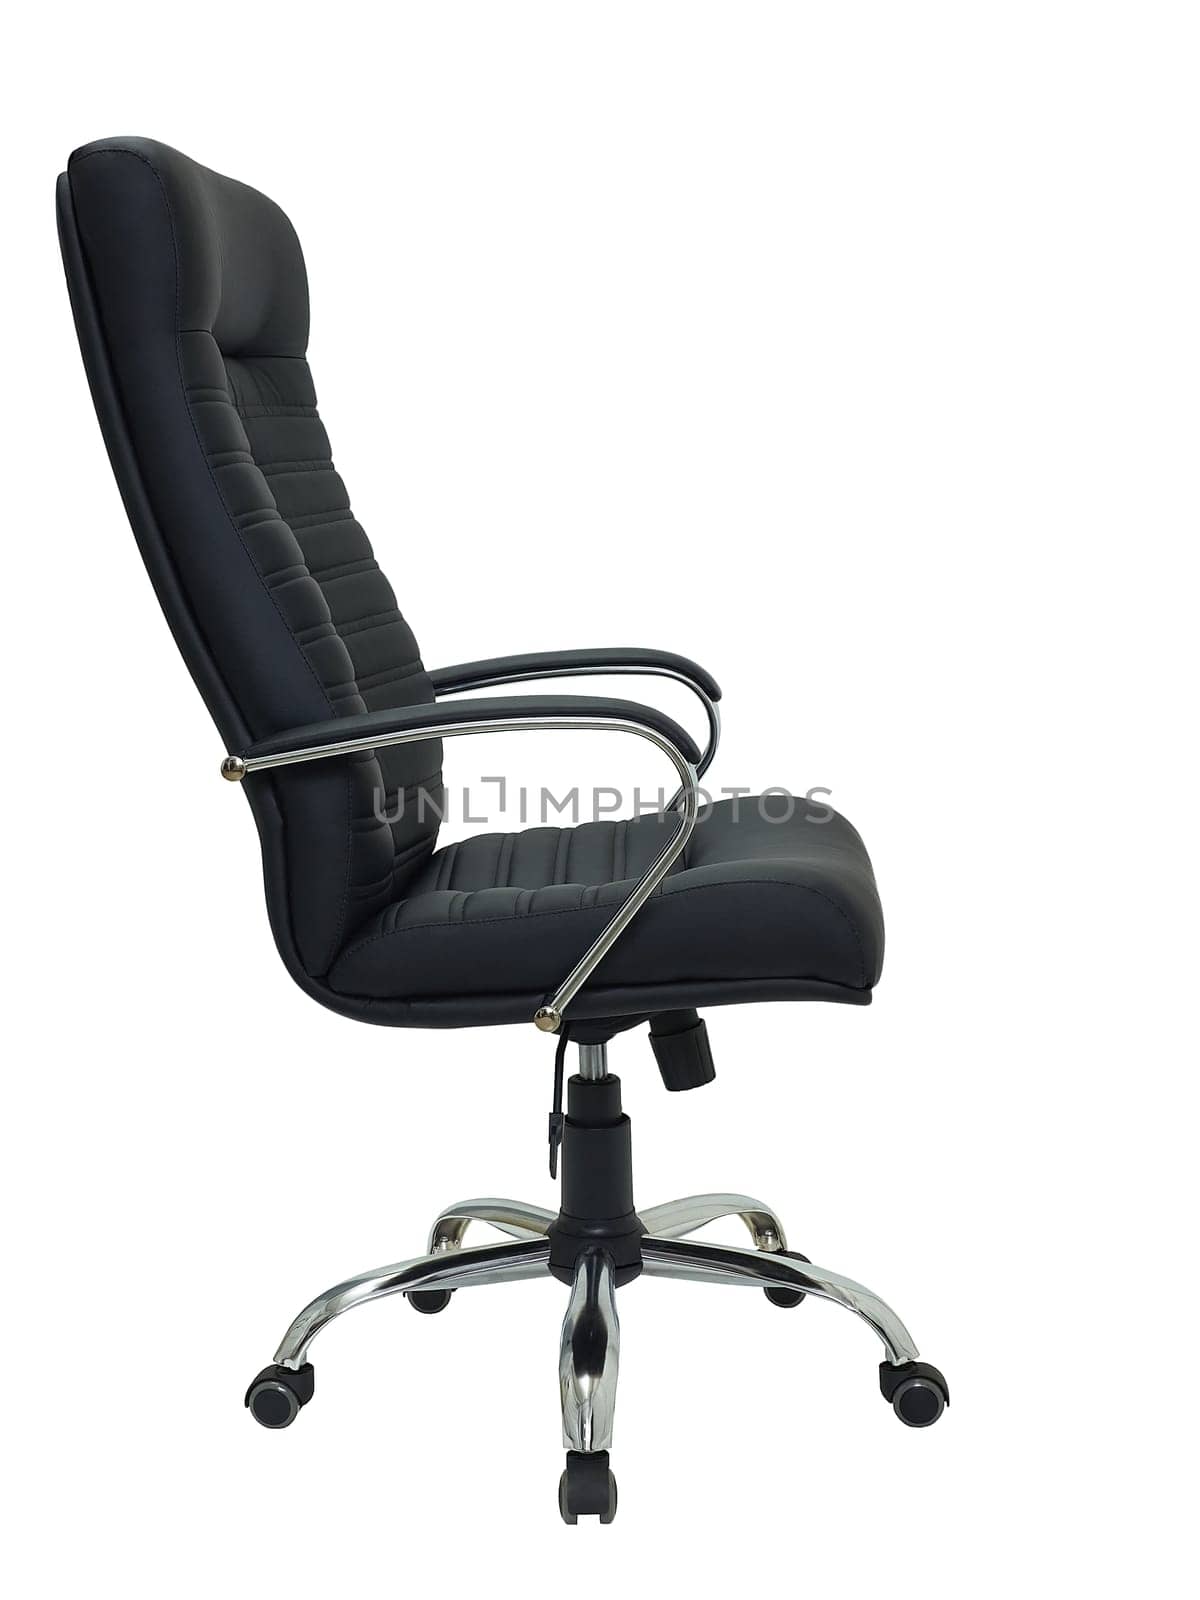 modern furniture in minimal style, interior, home design. black leather armchair on wheels isolated on white background, side view.